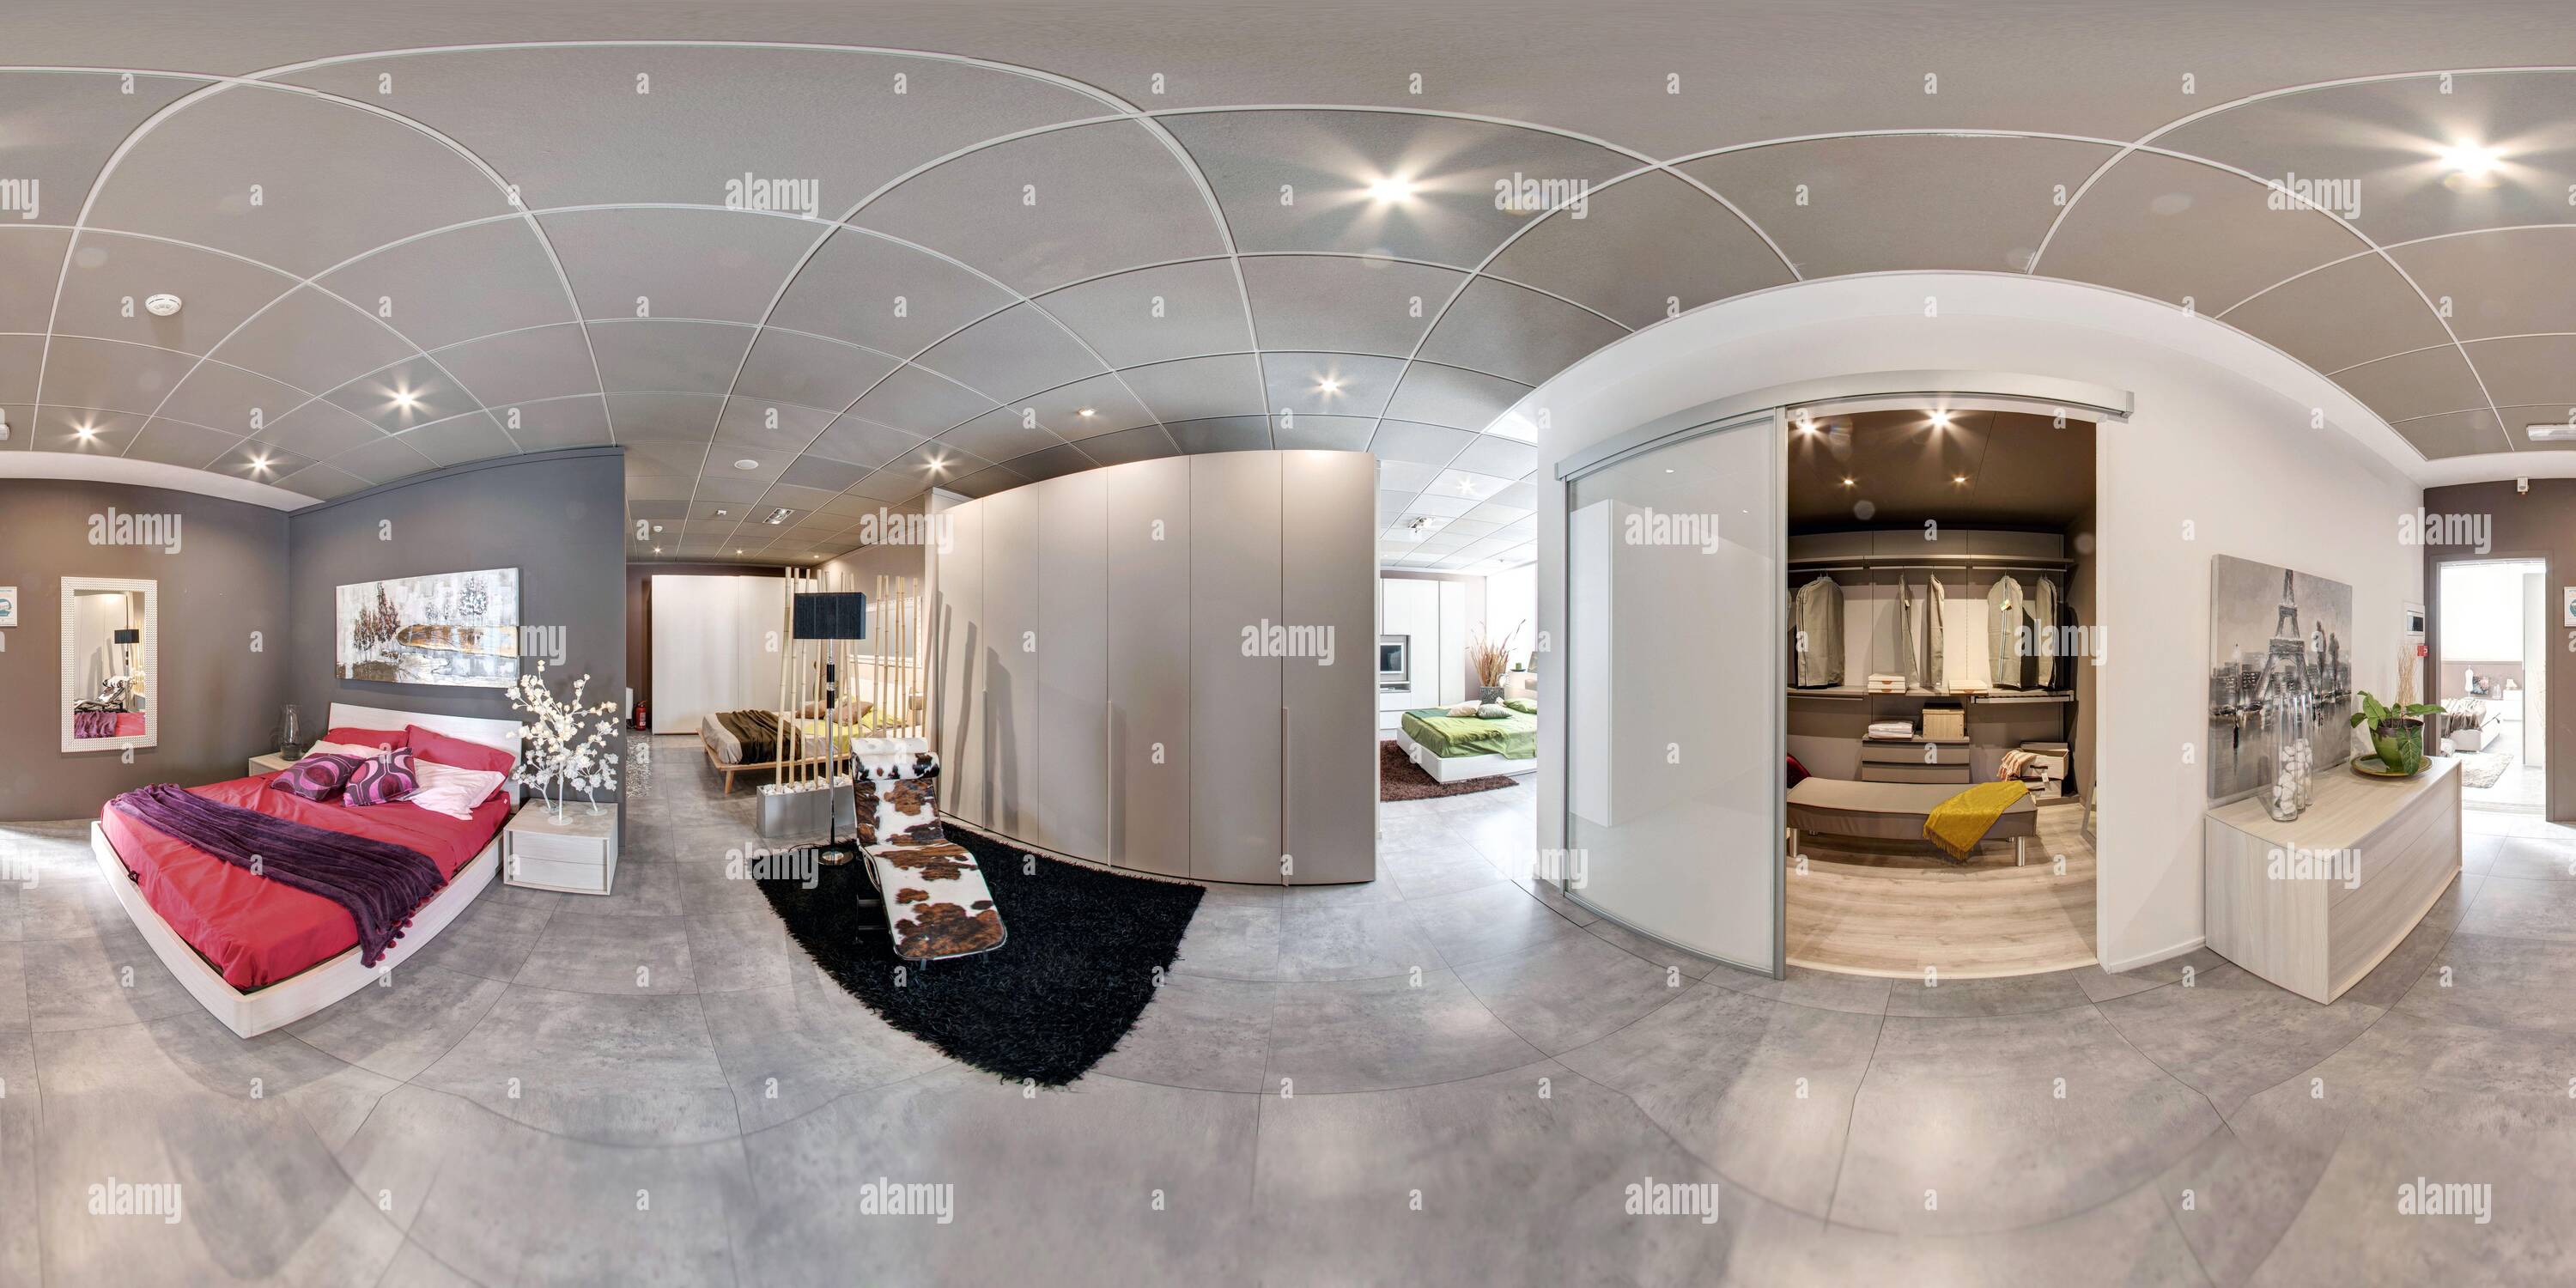 360 degree panoramic view of 360 degree panorama of a modern bedroom showroom with bed and walk-in closet for clothes in an interior design concept